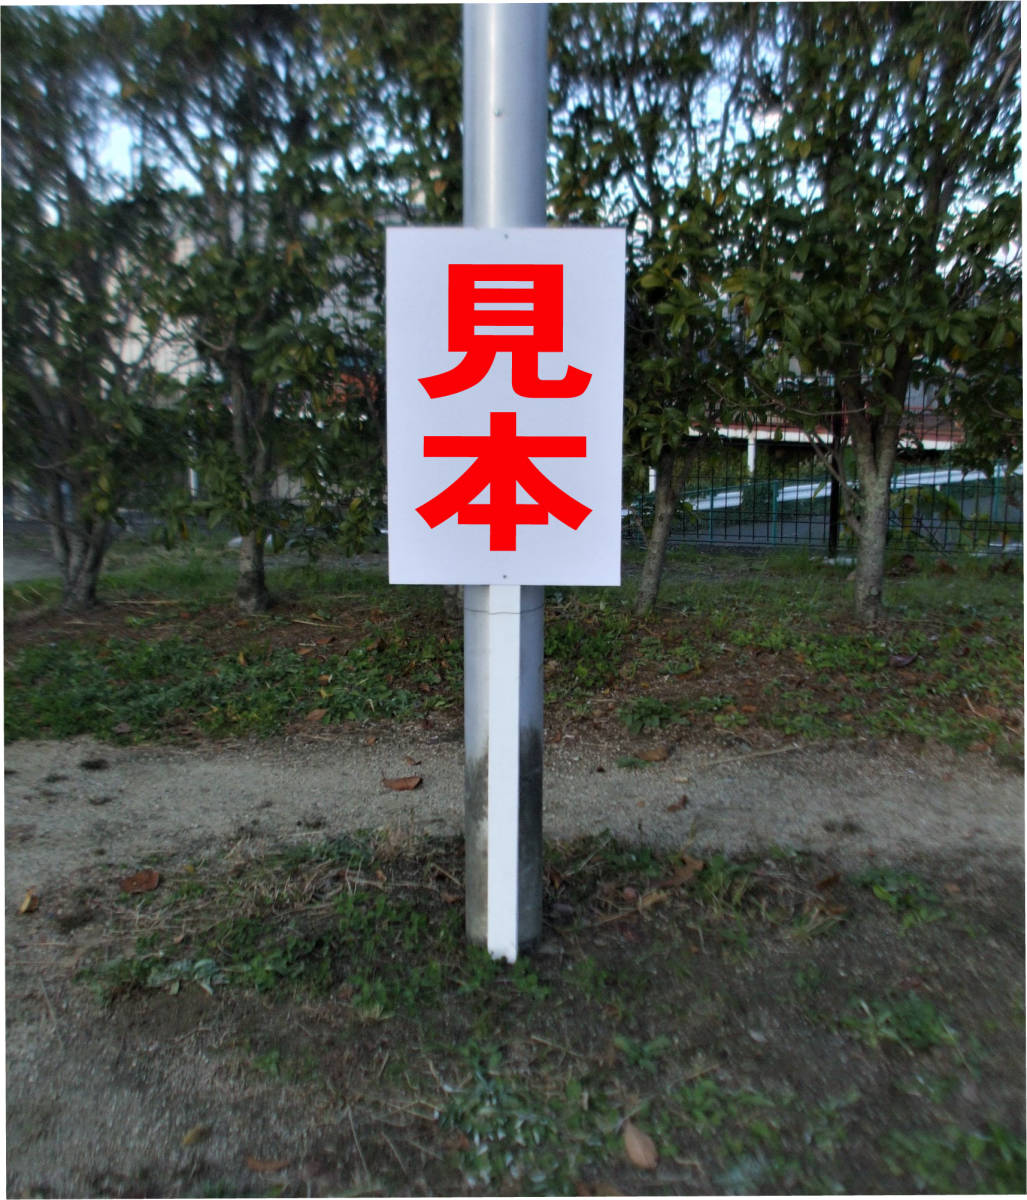  simple .. signboard [ empty . equipped ( red ) over white attaching ] real estate outdoors possible ( surface board approximately H45.5cmxW30cm) total length 1m